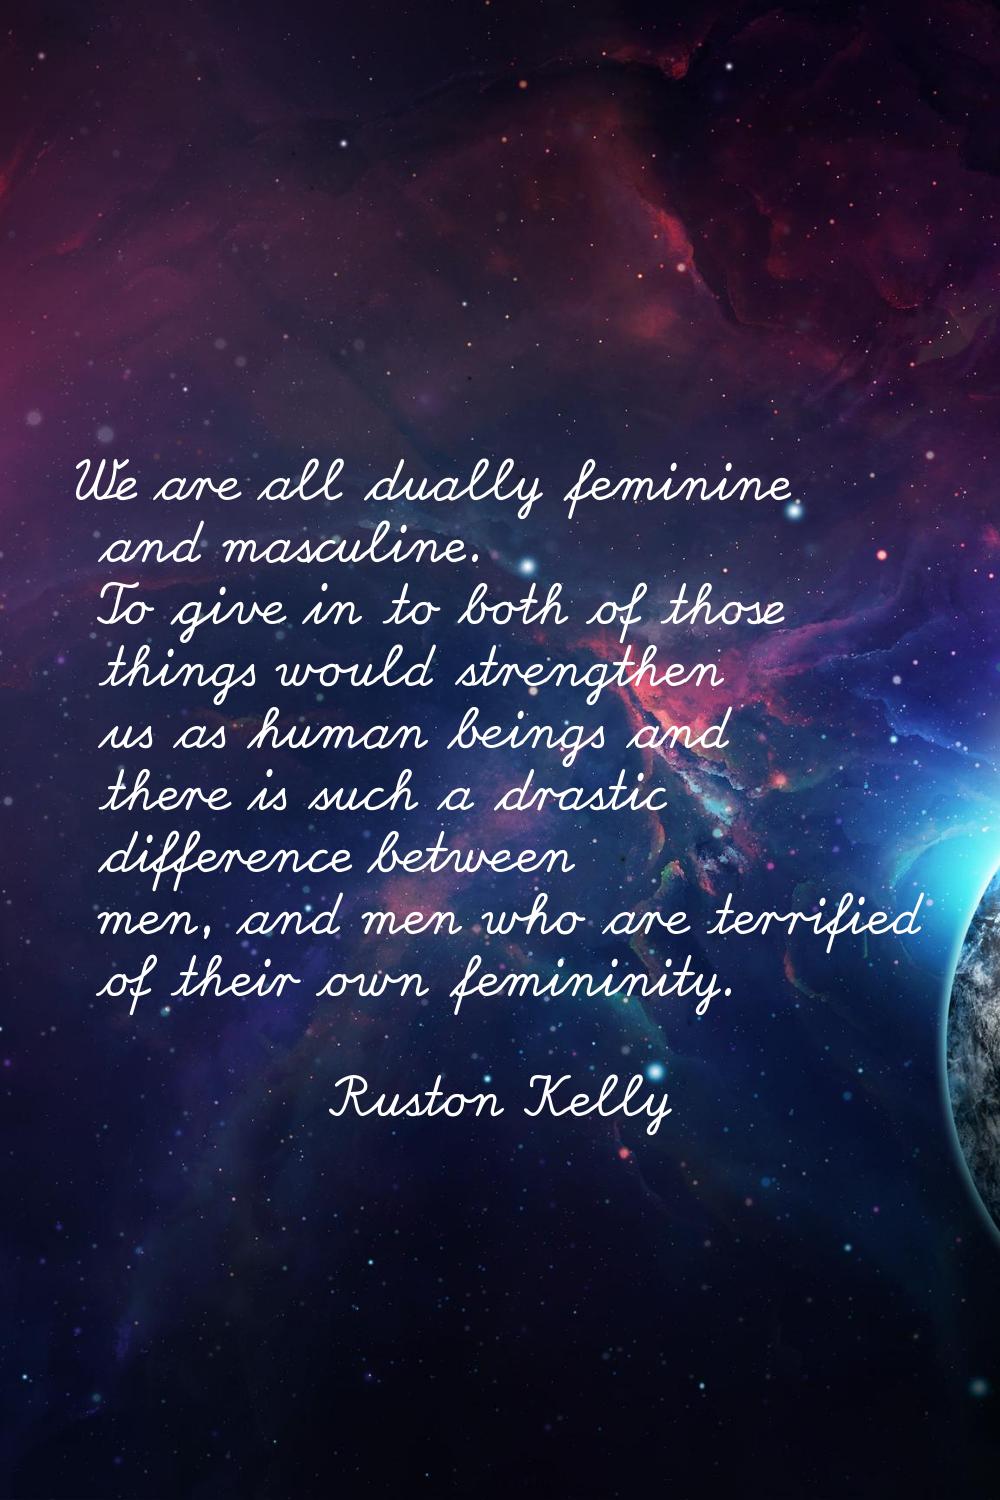 We are all dually feminine and masculine. To give in to both of those things would strengthen us as